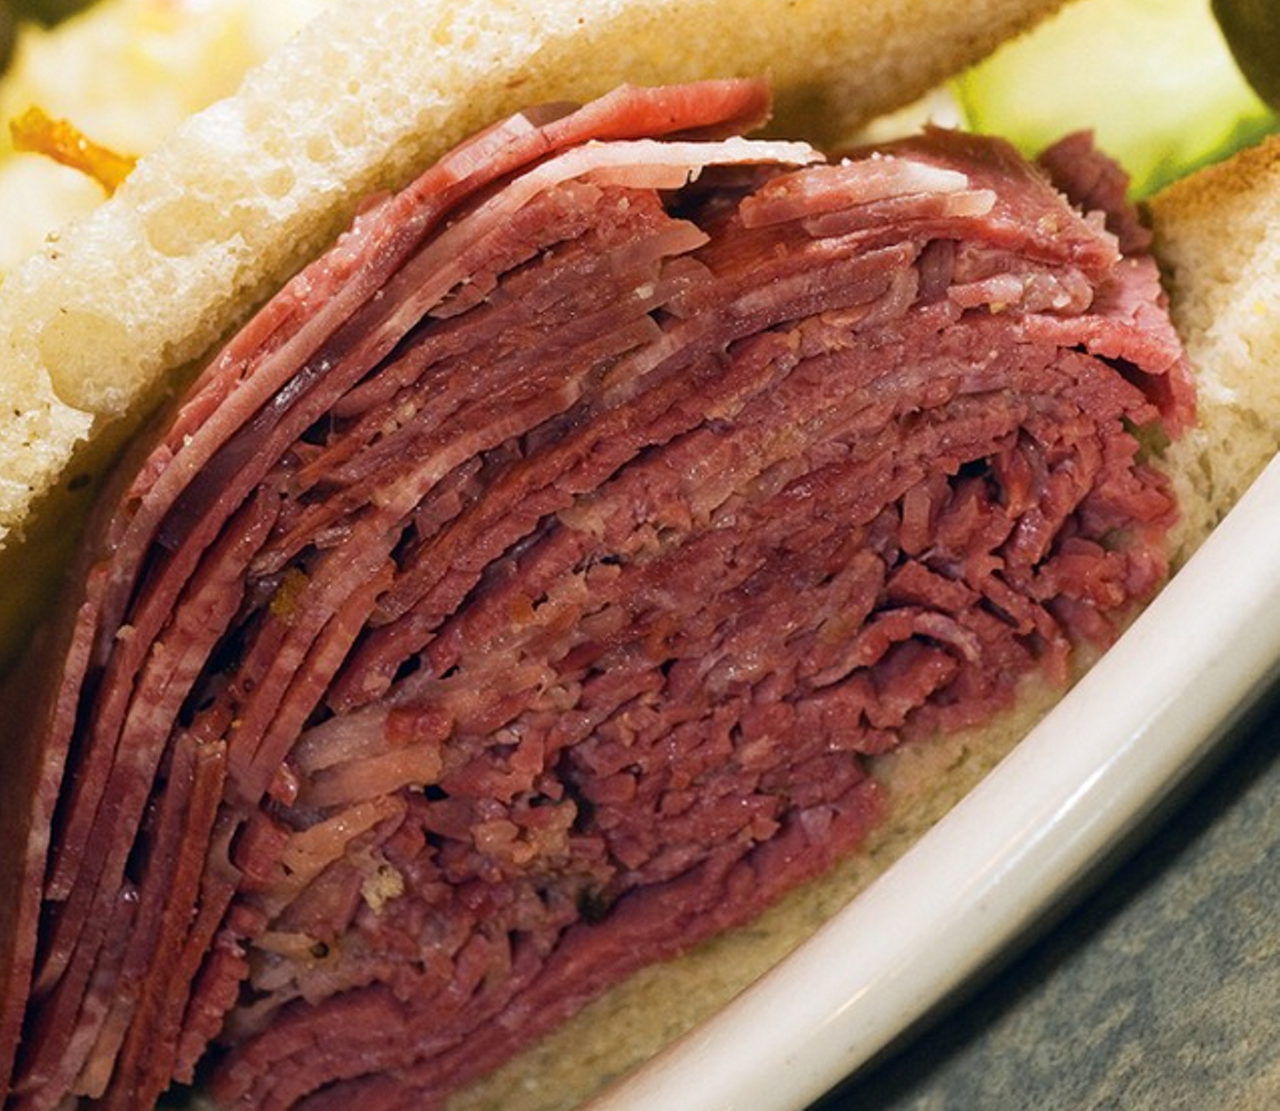 Corned Beef
What: The sandwich stacked high on rye with mustard
Why: Nothing fuels a debate in Cleveland faster than asking which shop serves the best version of this Jewish soul food
Where: Slyman's has long been the home of Cleveland's best-loved corned beef, but Jack's Deli, Corky & Lenny's and Mr. Brisket ain't chopped liver either